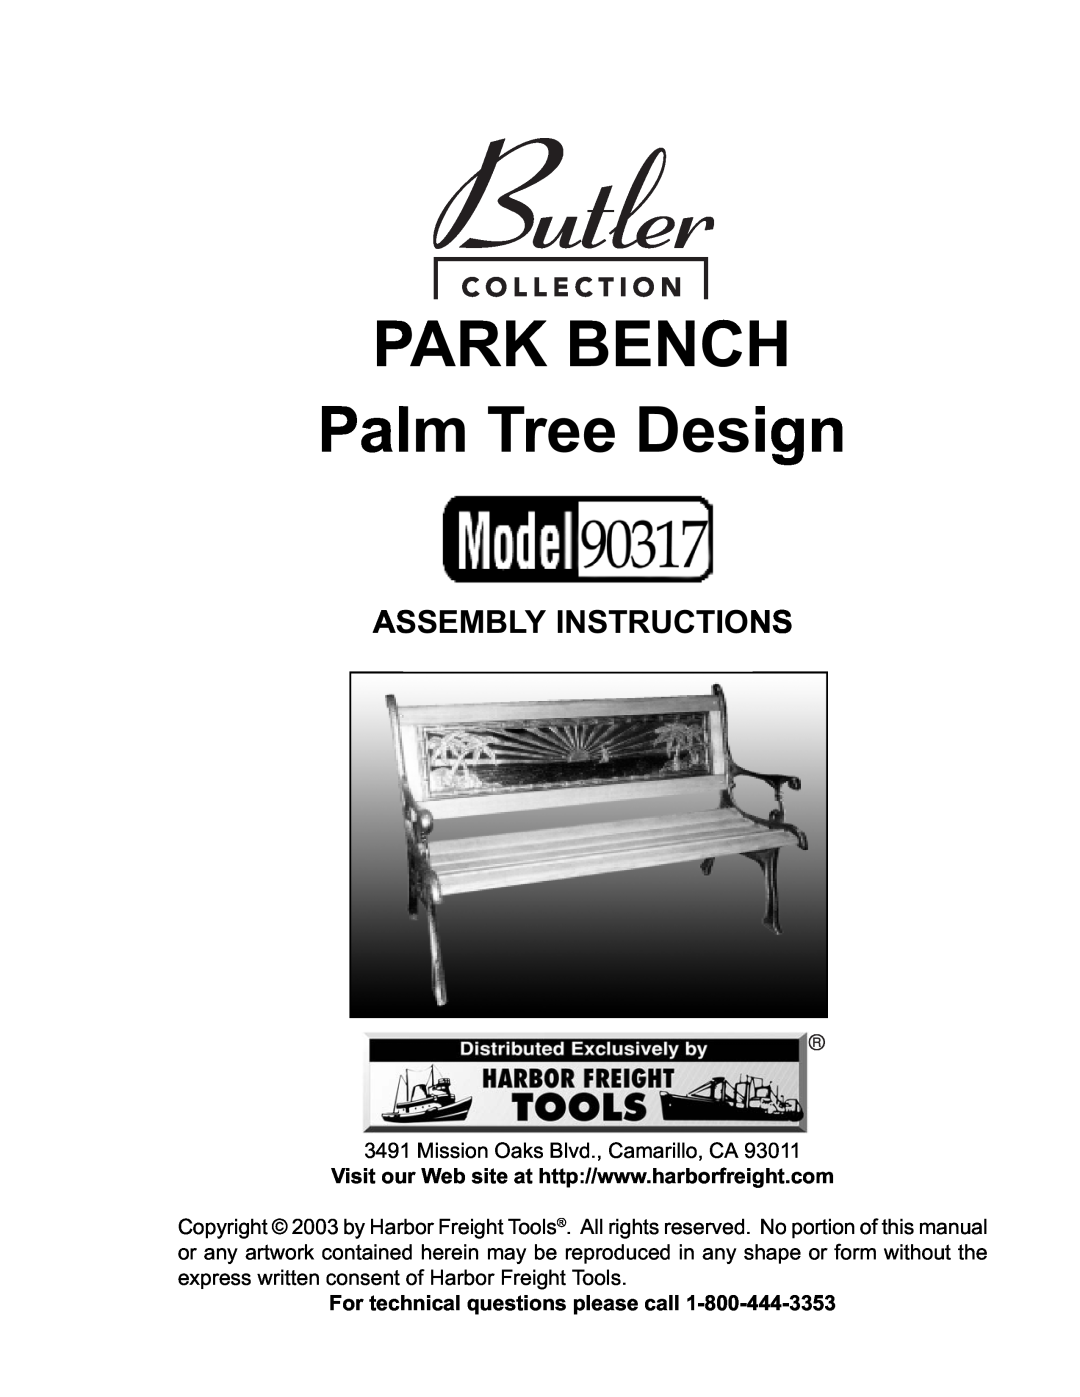 Butler 90317 manual Mission Oaks Blvd., Camarillo, CA, For technical questions please call, PARK BENCH Palm Tree Design 